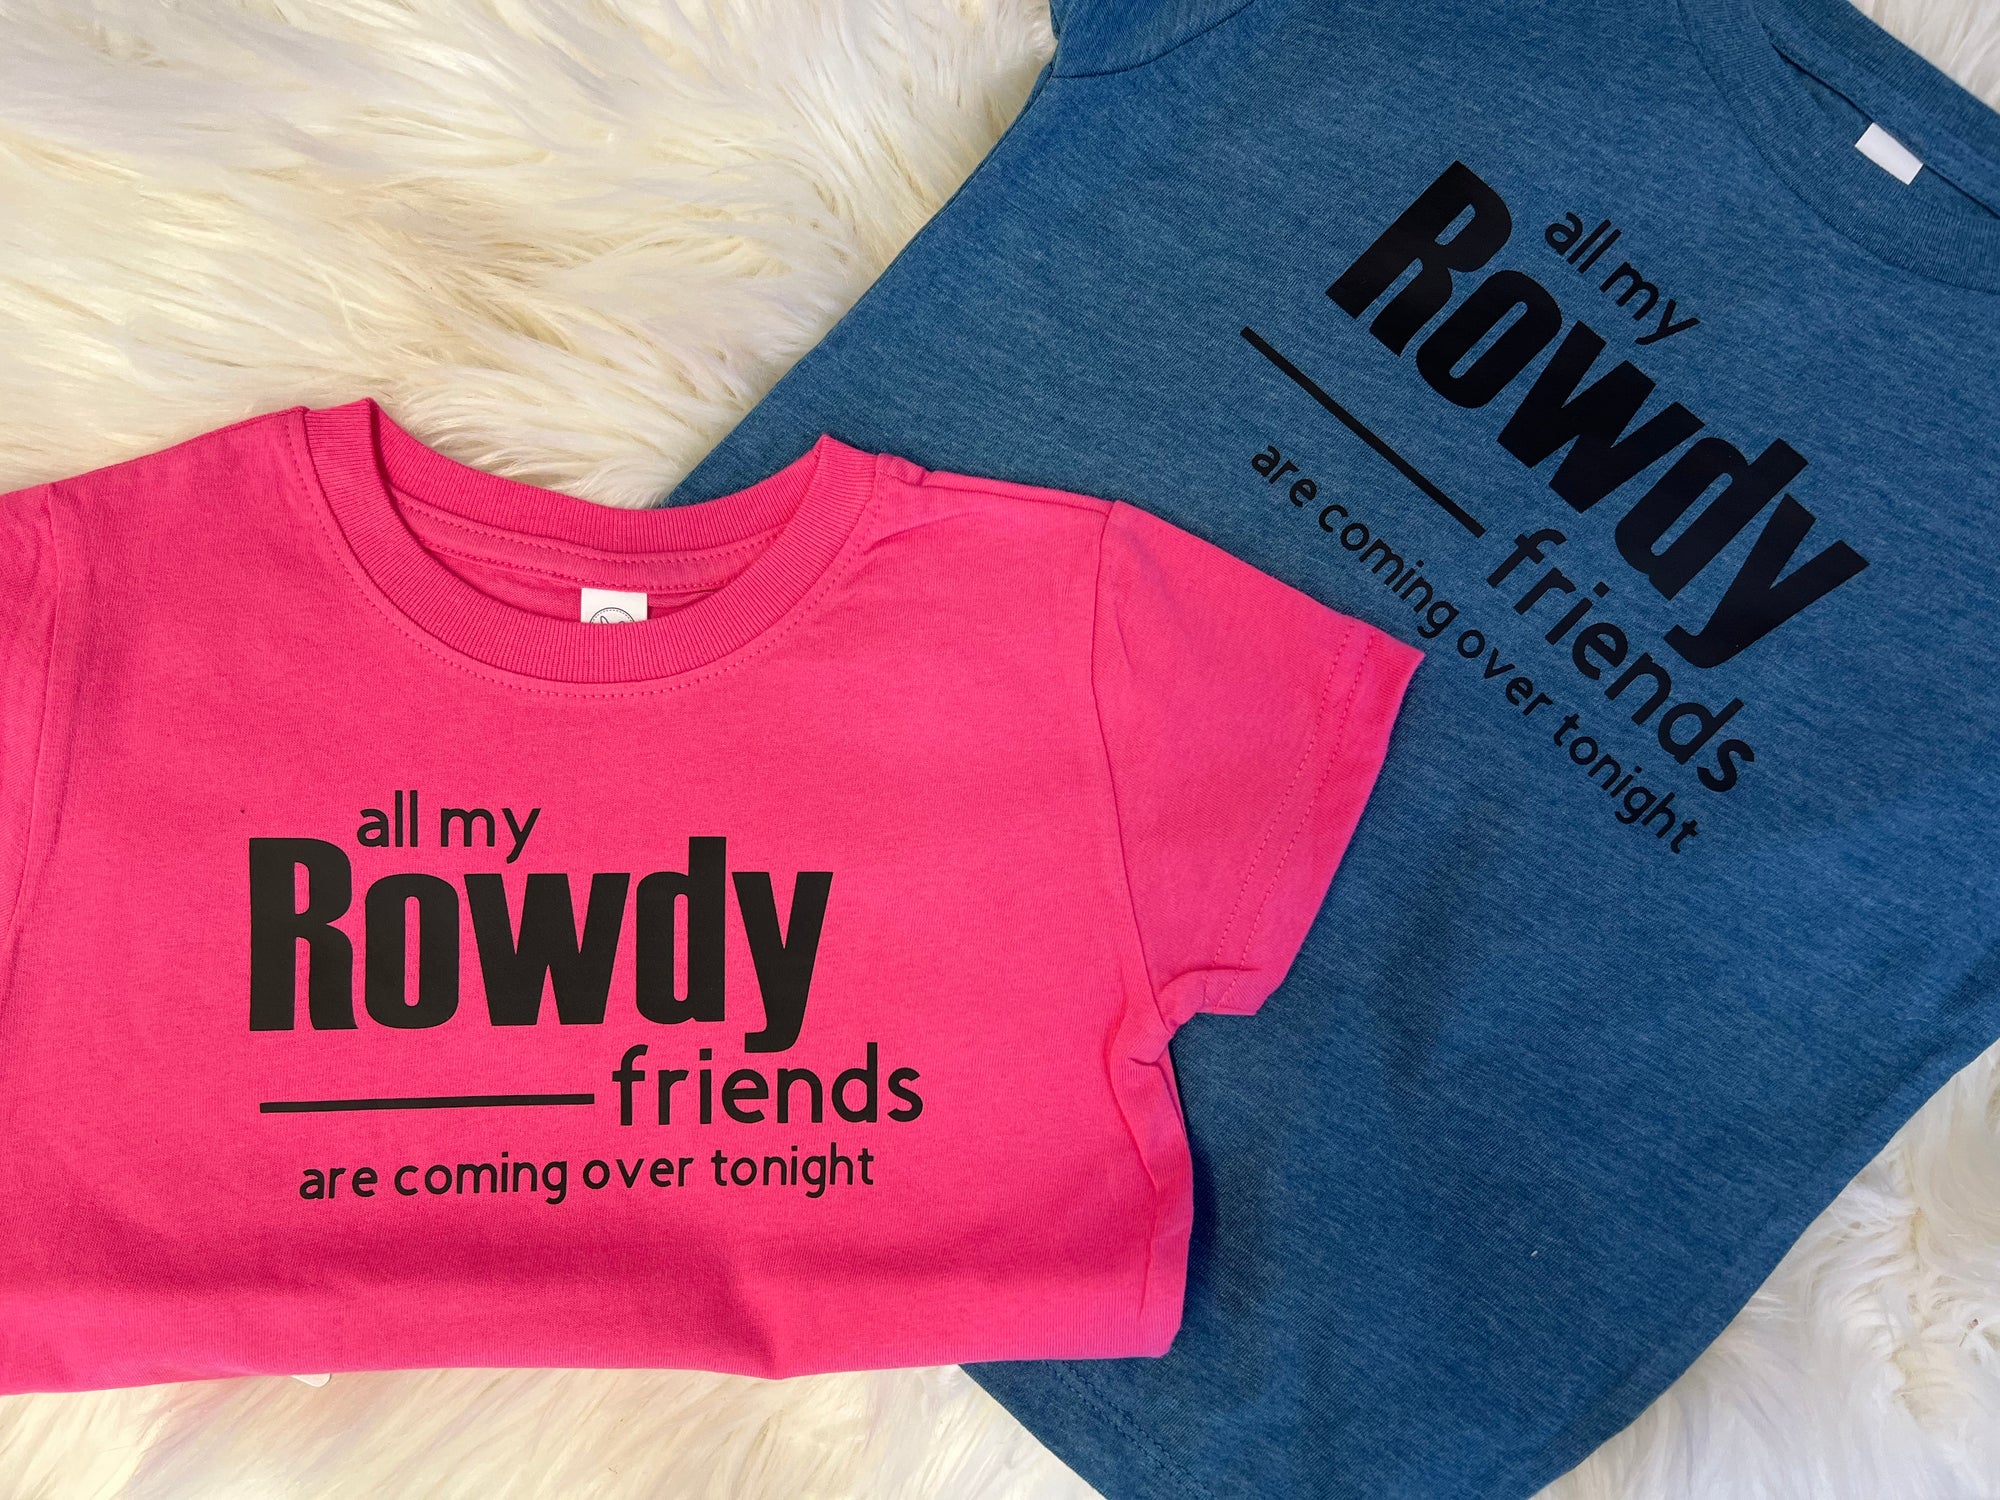 All my rowdy friends are coming over tonight- Girls